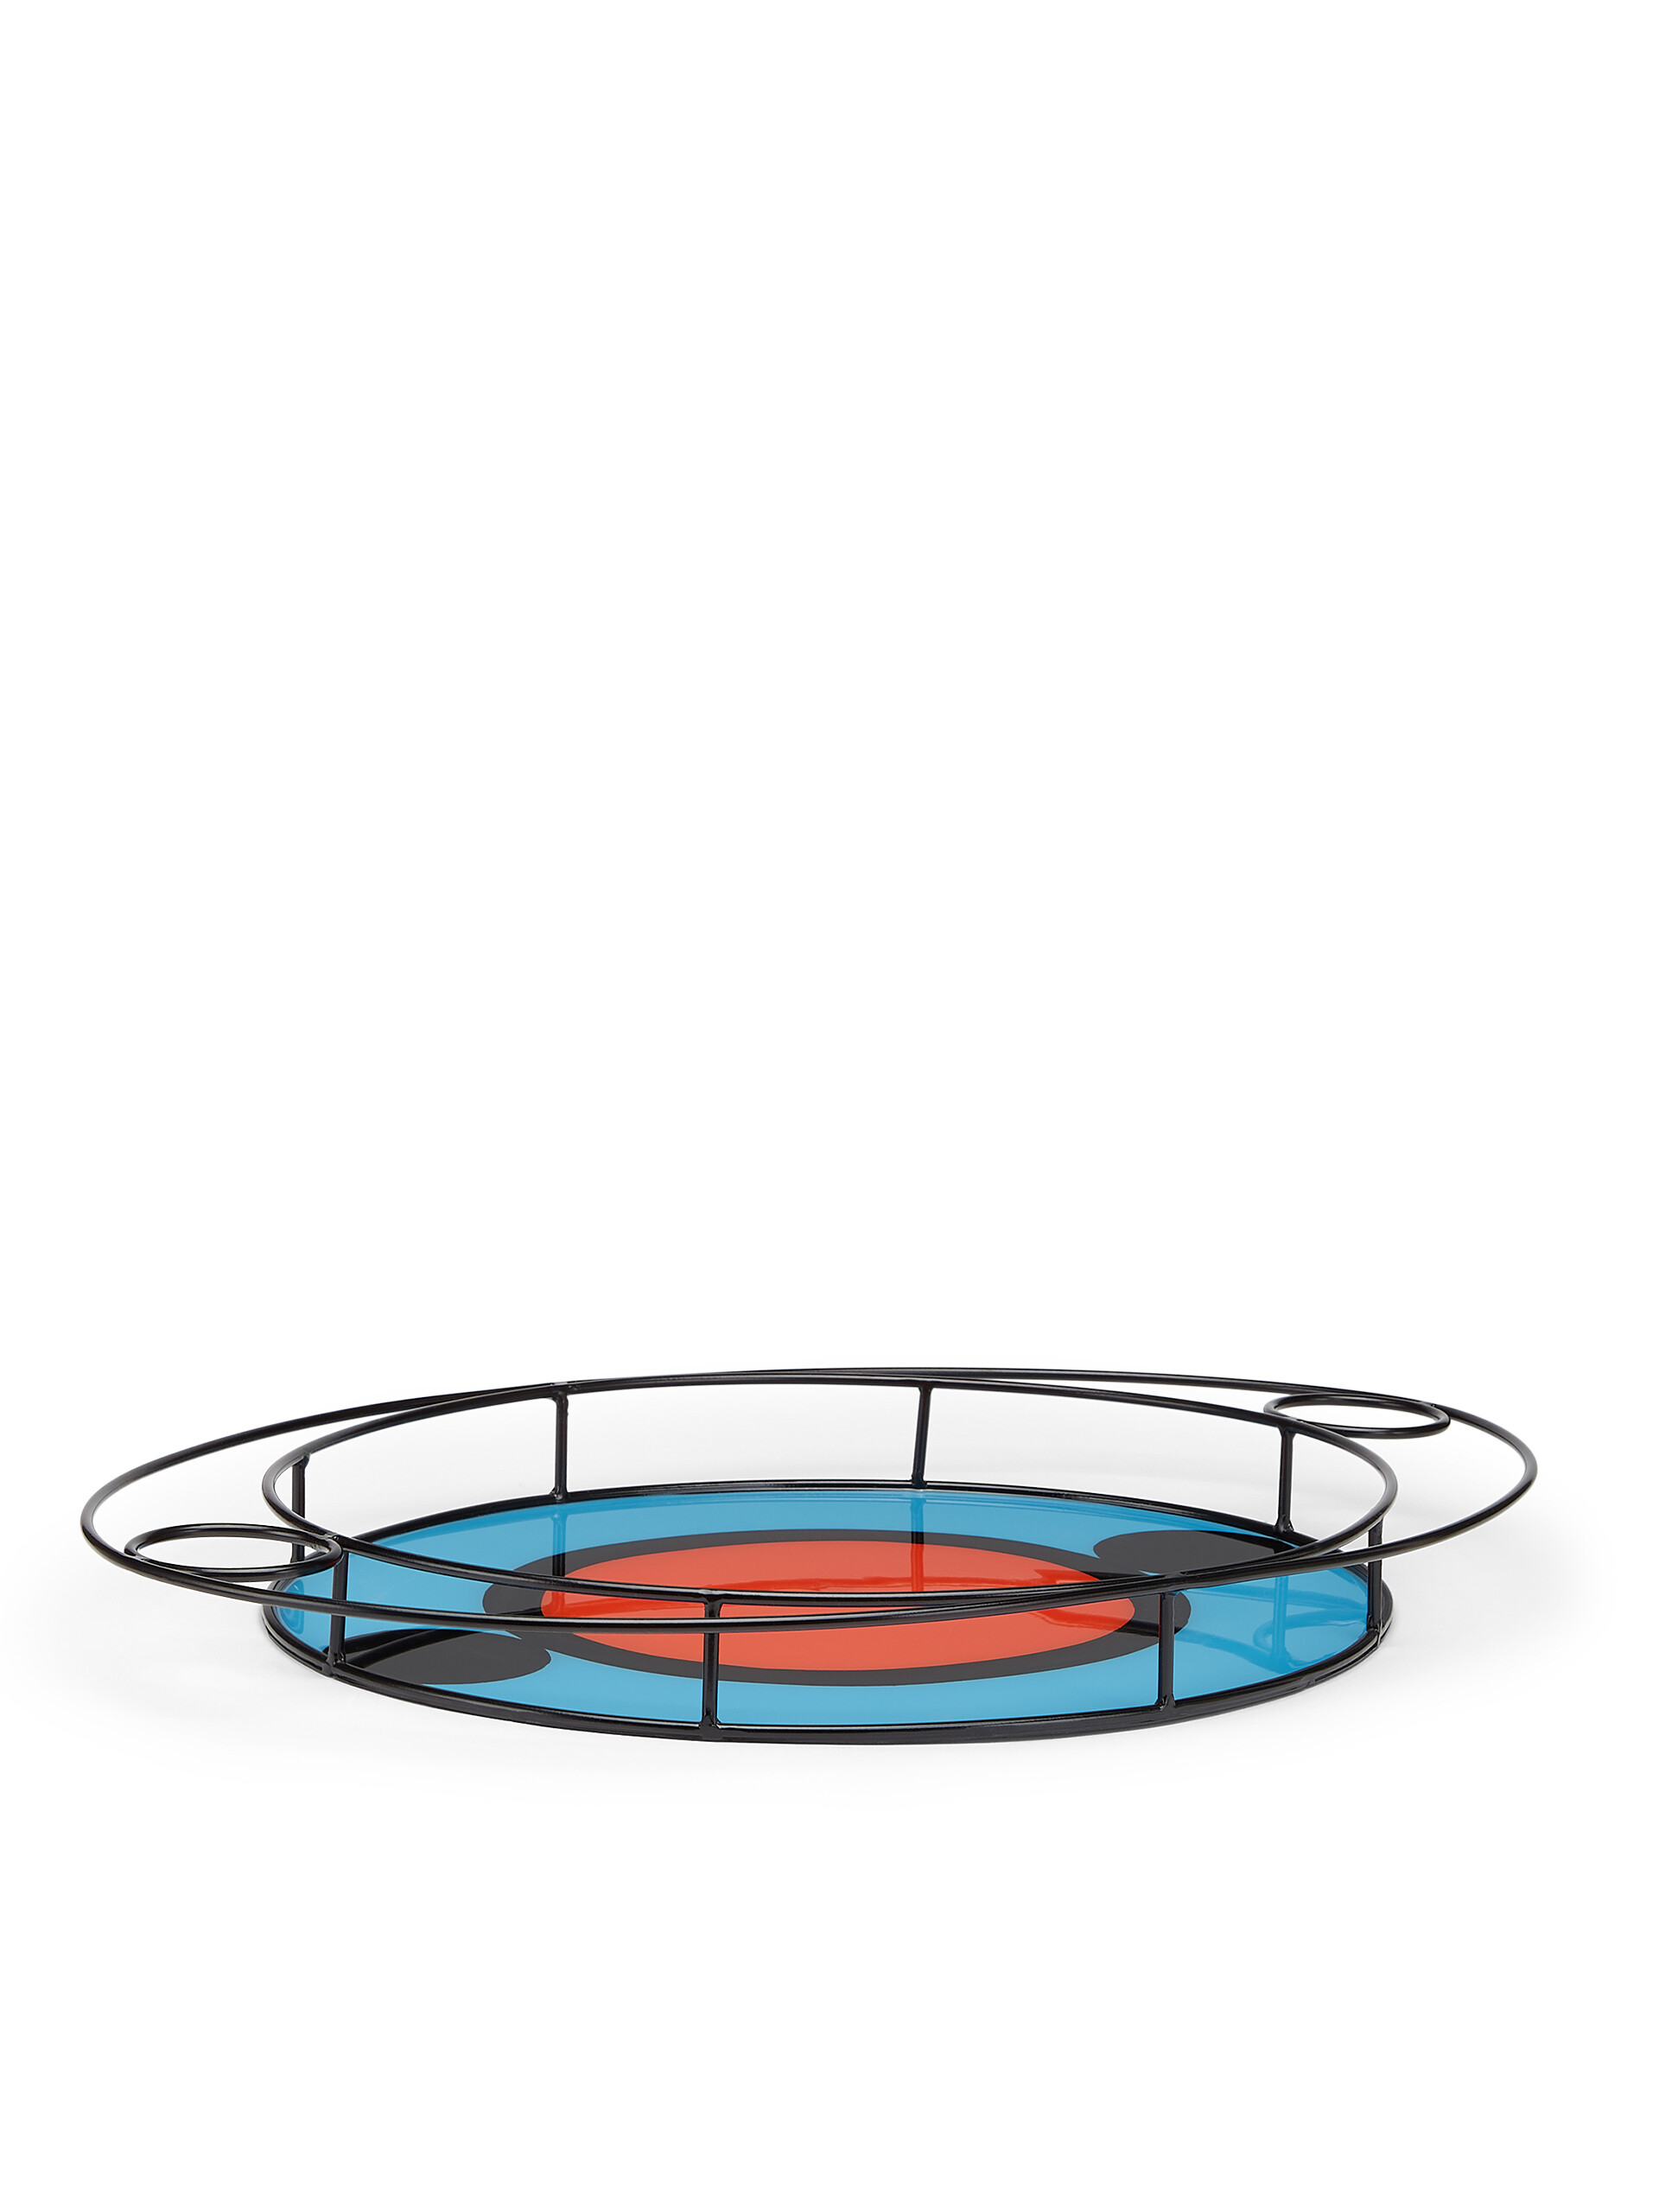 MARNI MARKET oval tray in iron and blue, black and red resin - Accessories - Image 2